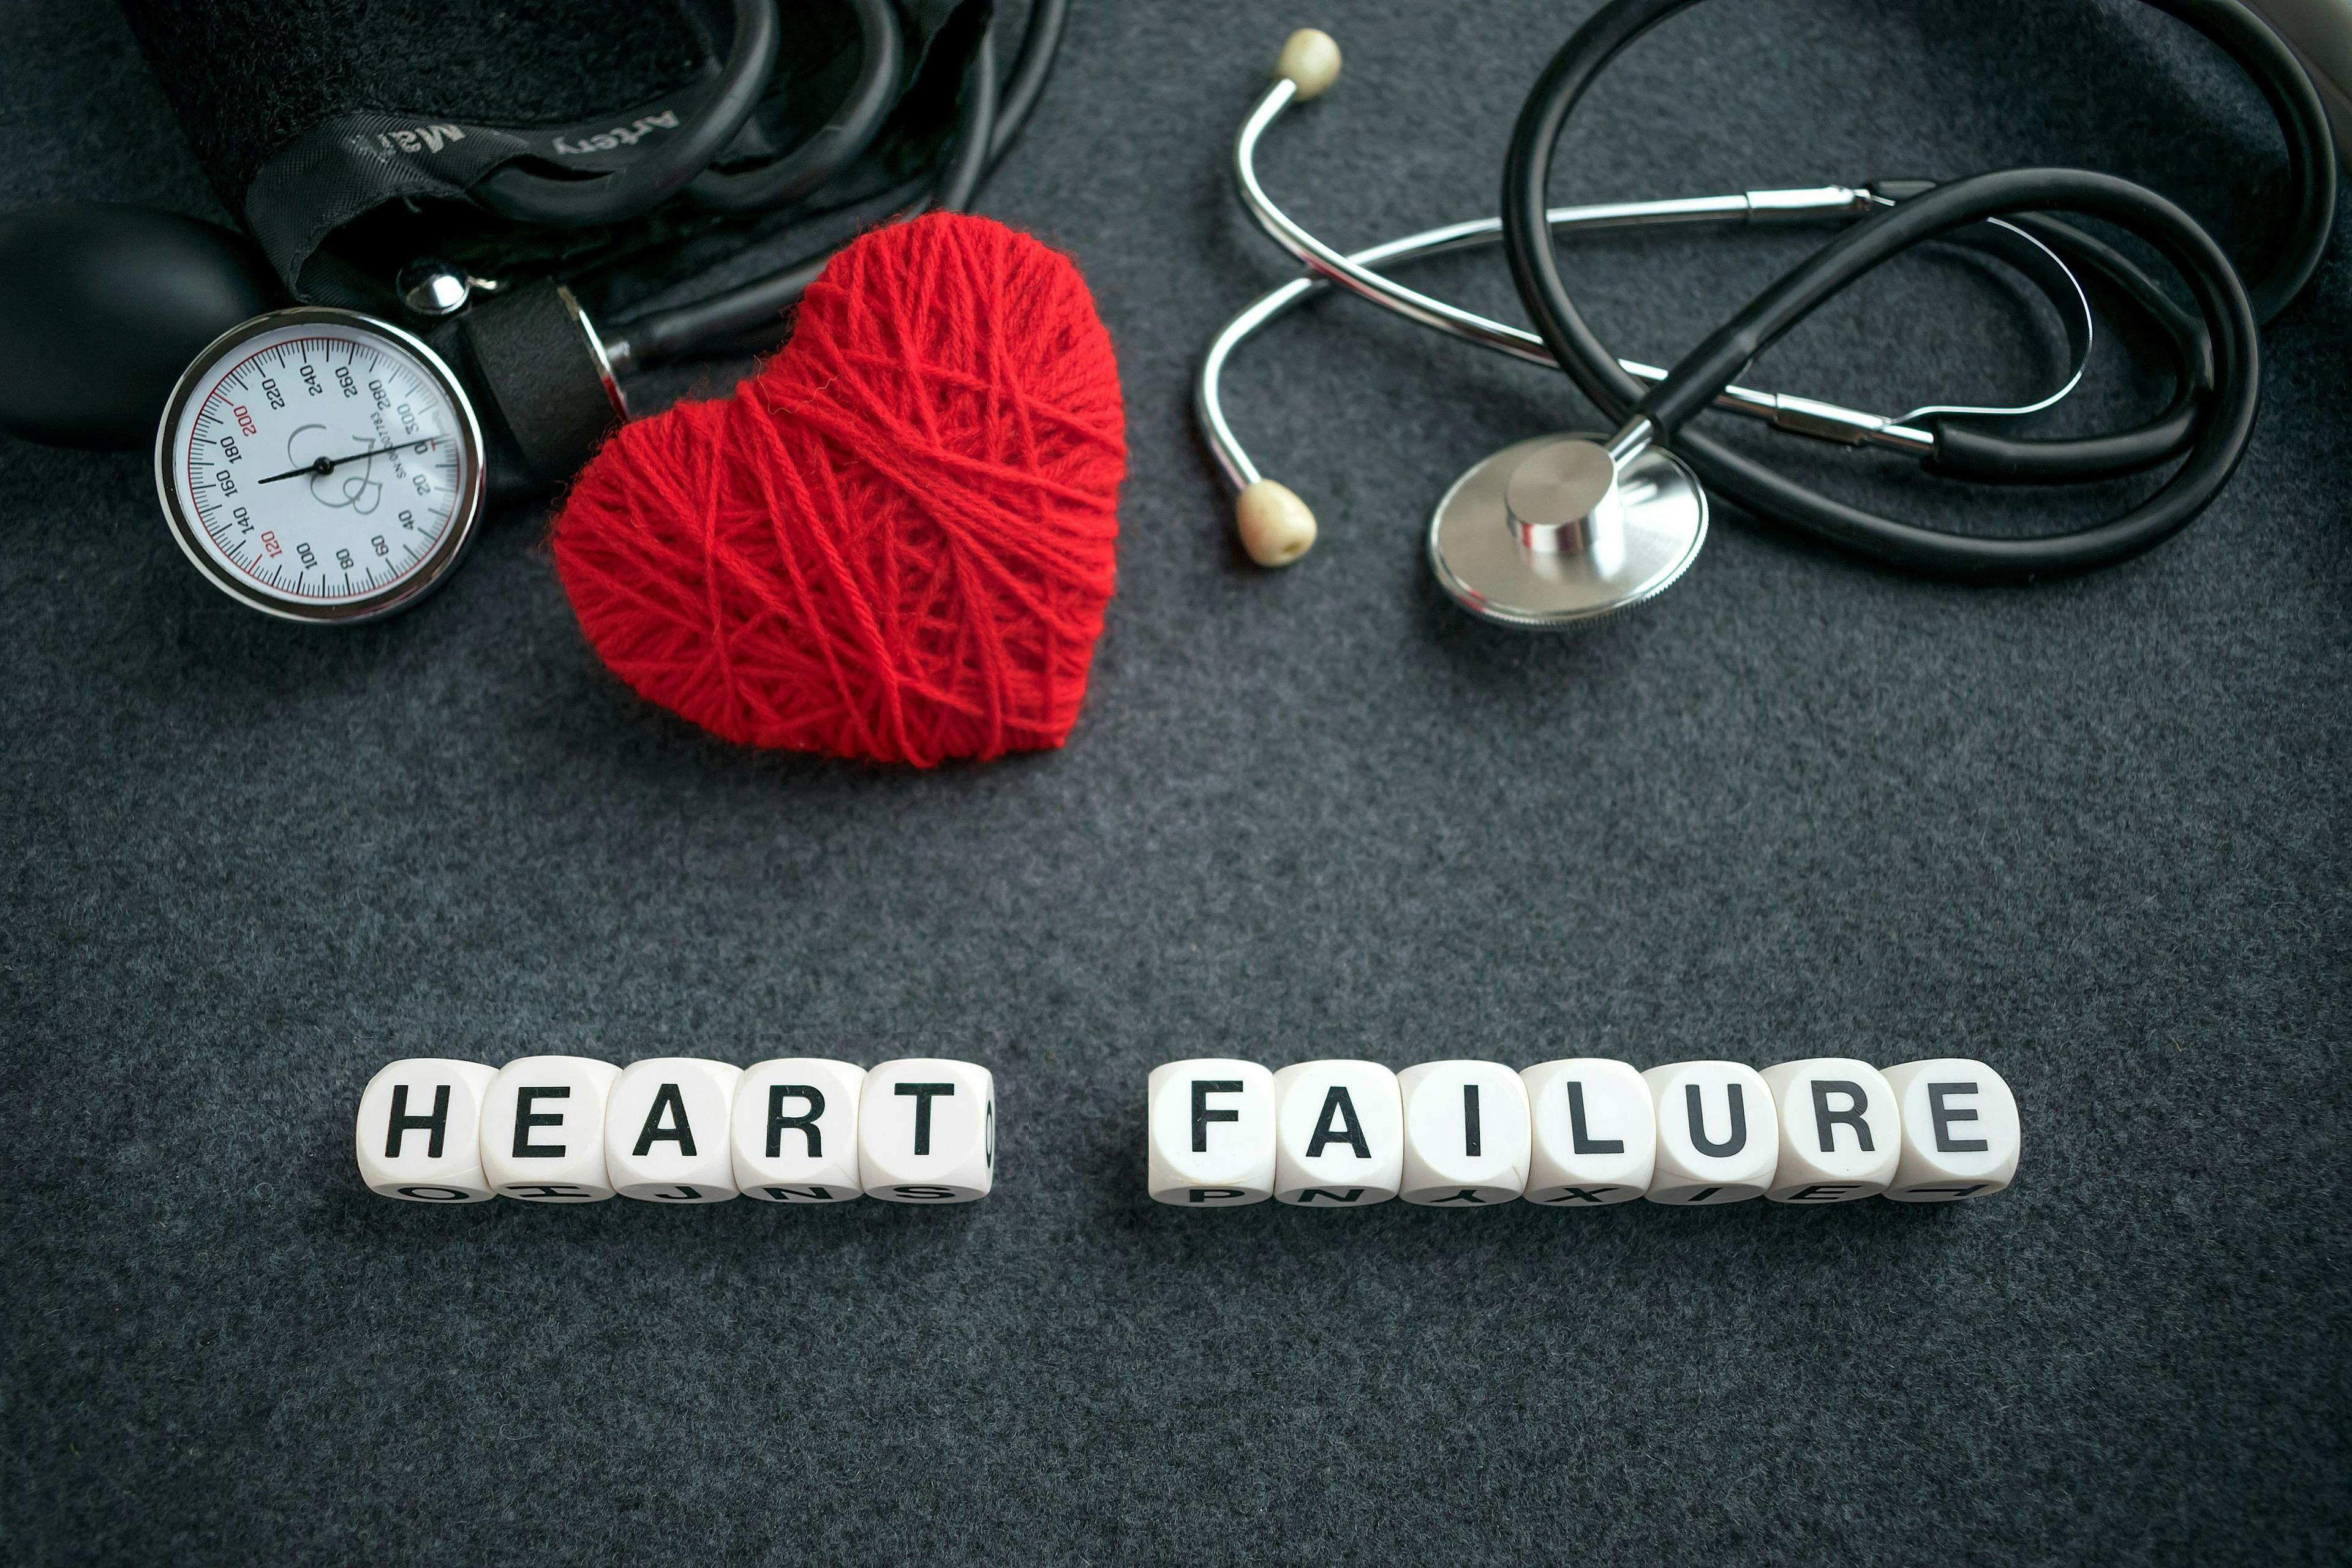 Word HEART FAILURE from white cubes with letters on dark background with red thread heart and tonometer. HEART FAILURE inscription with medical equipment for heart diagnostics, stethoscope | Image Credit: irissca - stock.adobe.com